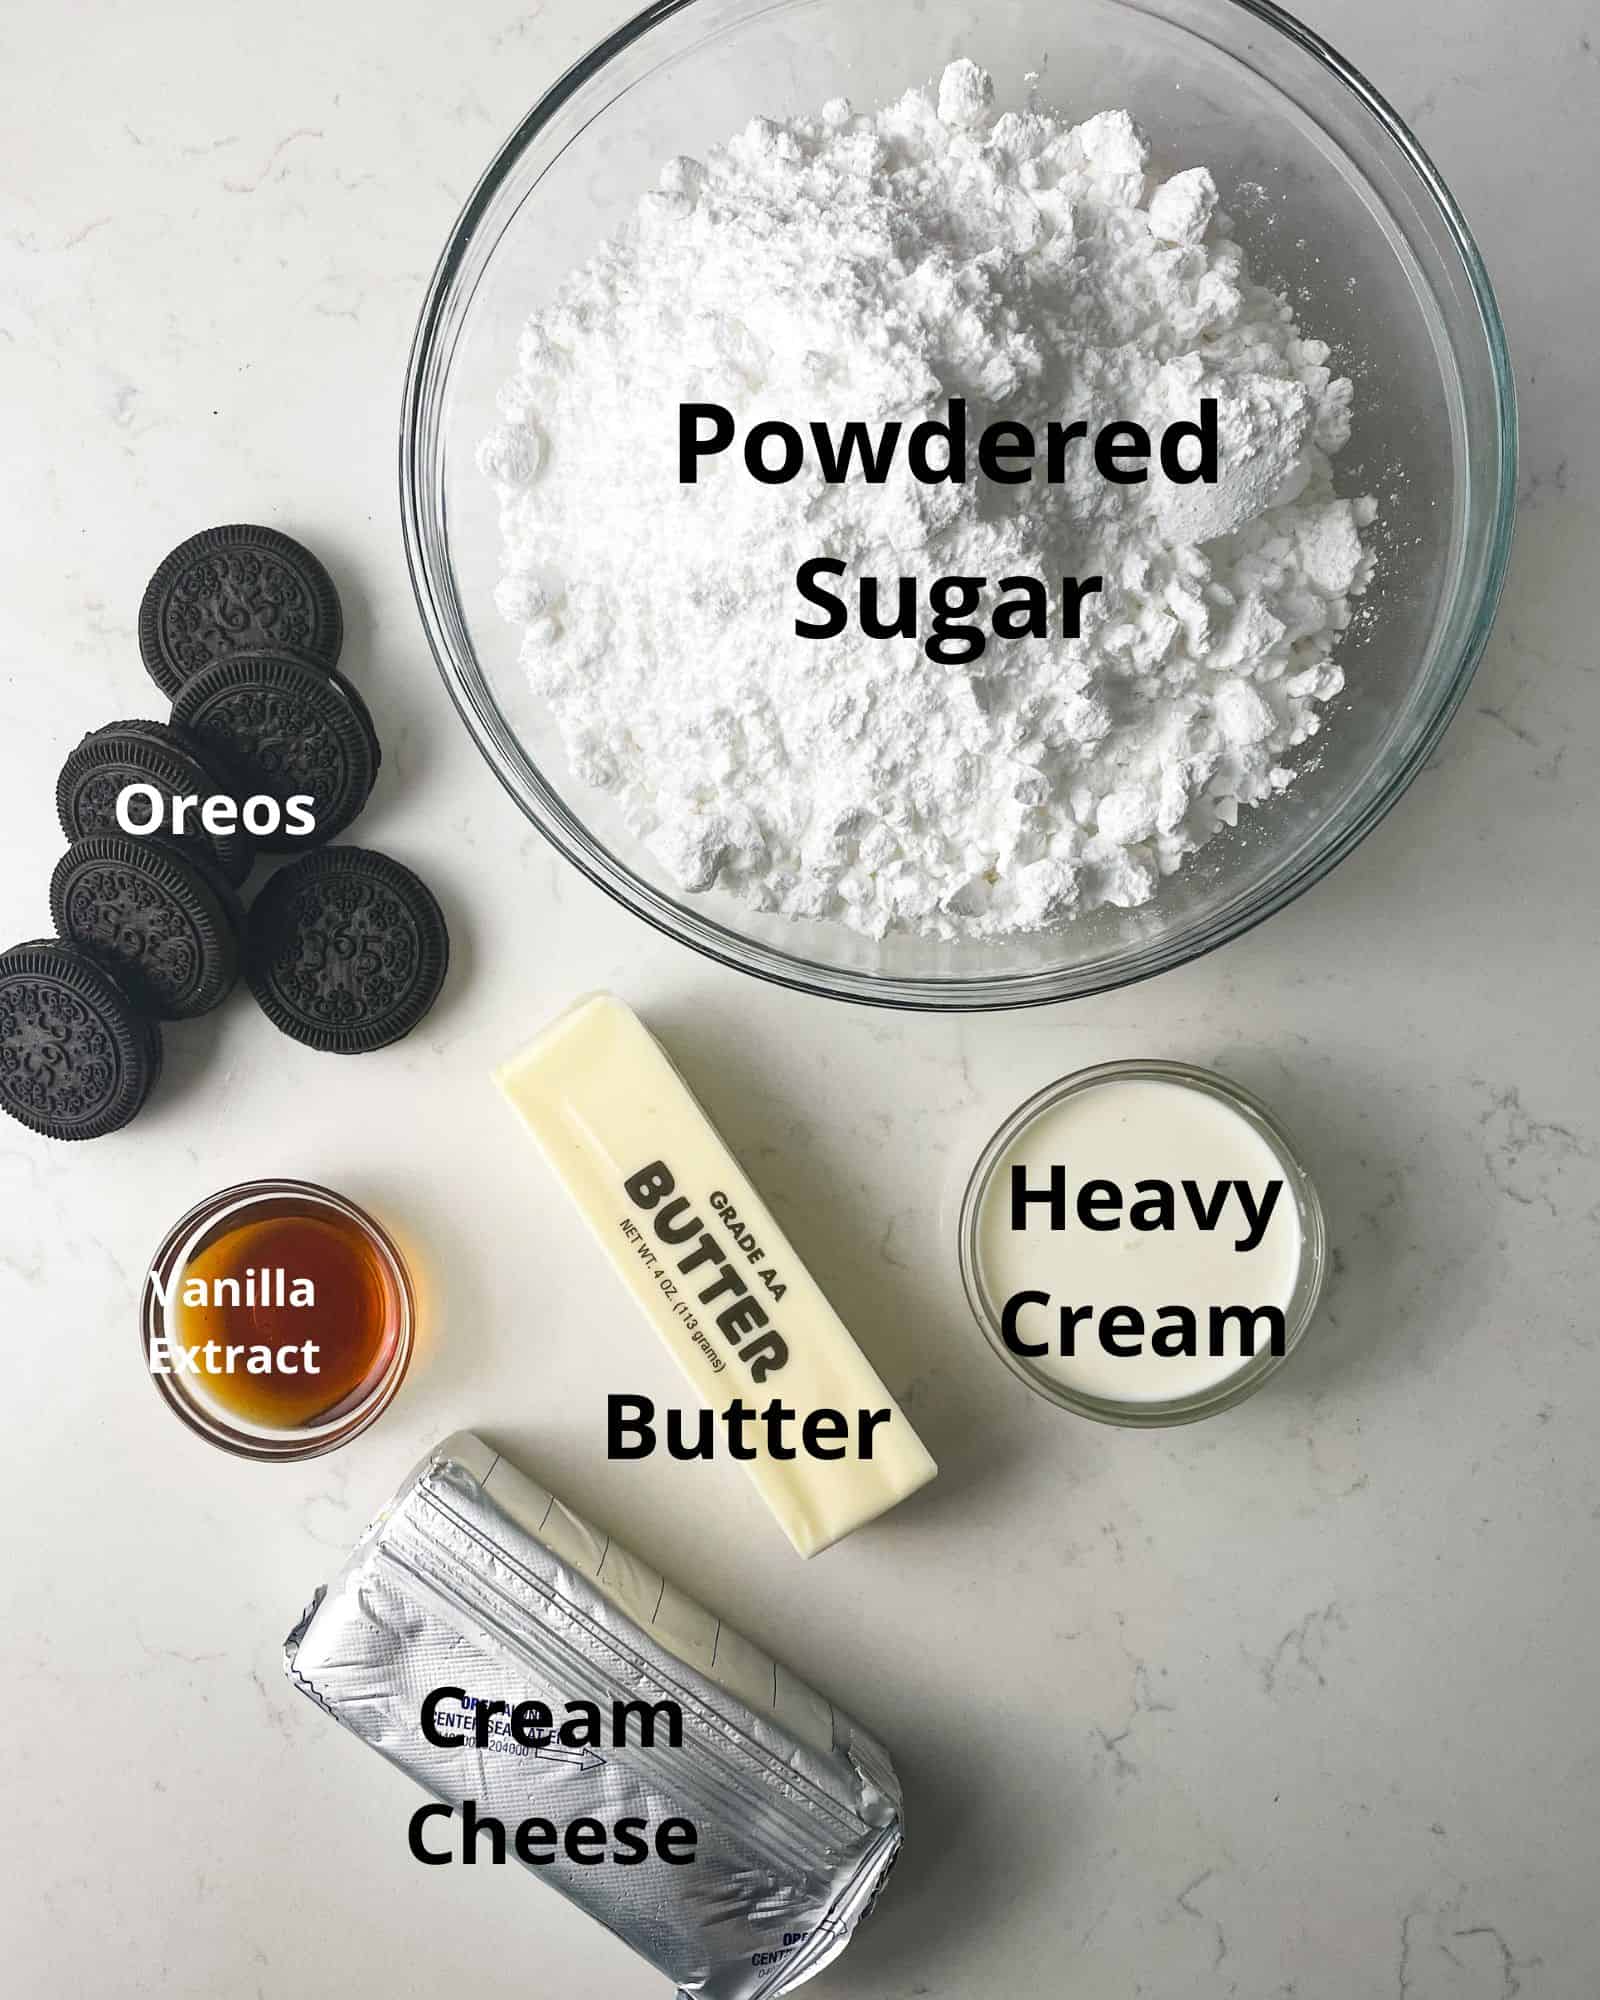 ingredients to make oreo frosting - powdered sugar, butter, cream cheese, heavy cream, oreos, and vanilla extract.